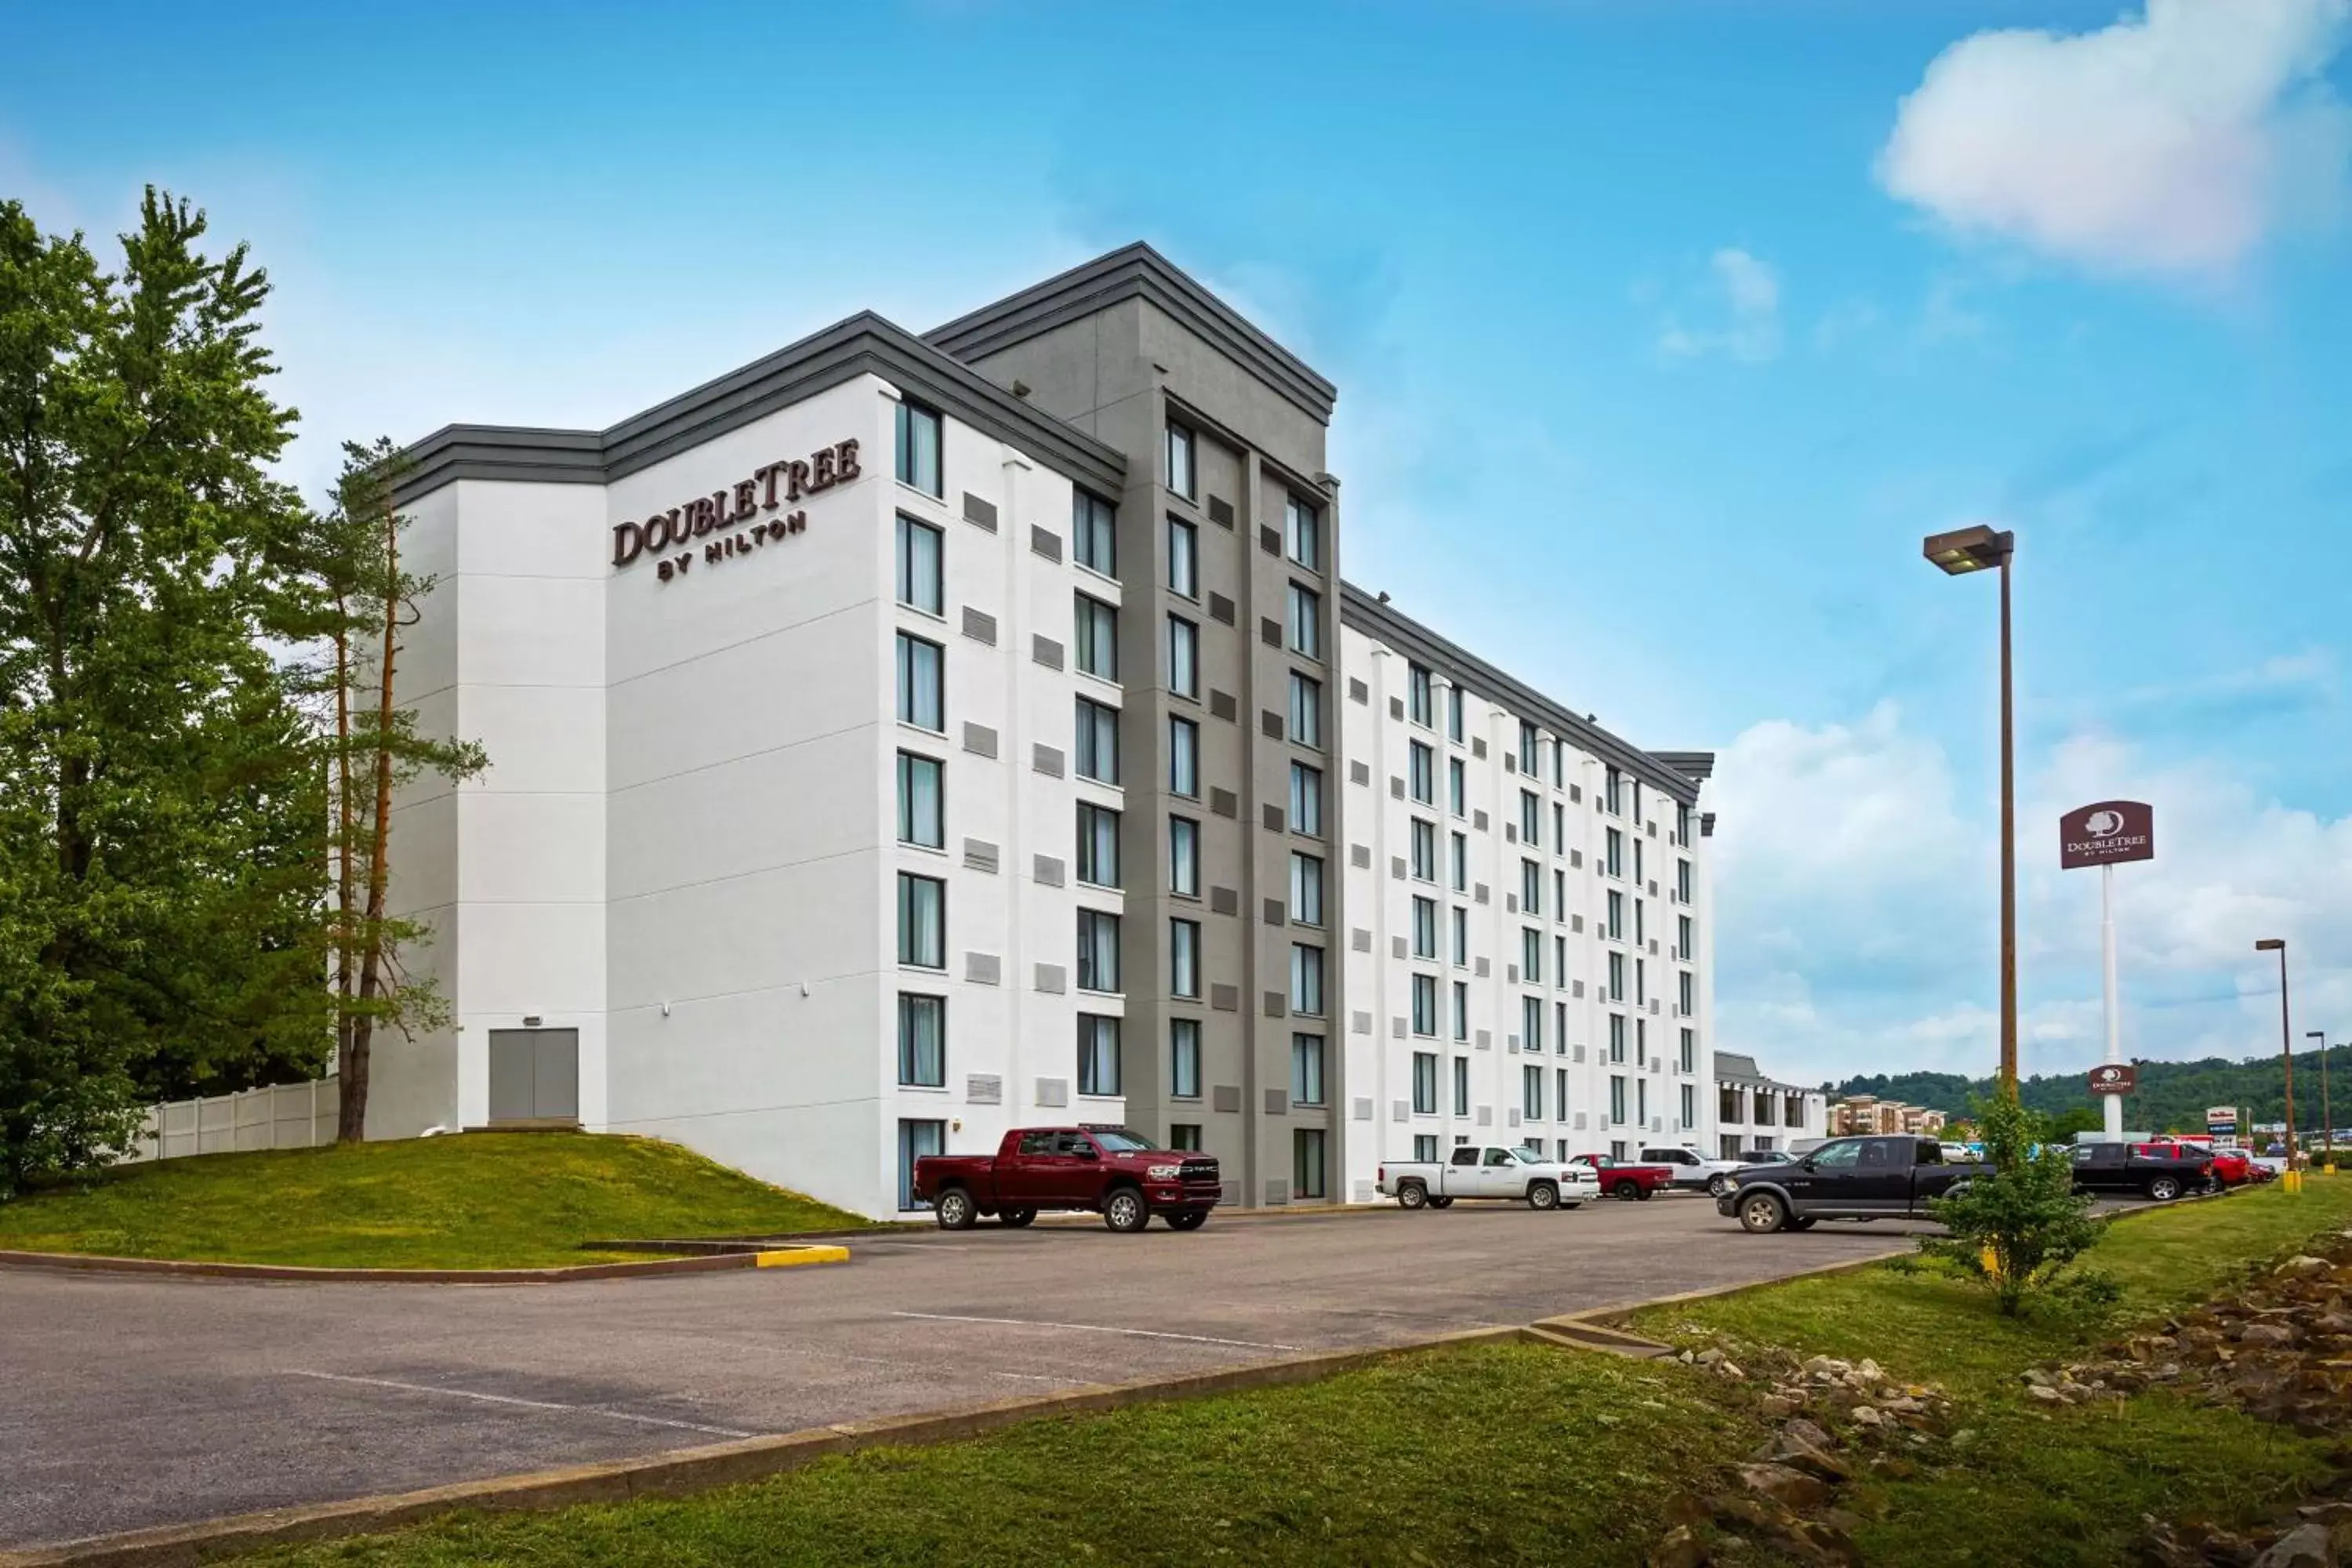 Property Building in DoubleTree by Hilton Pittsburgh - Meadow Lands